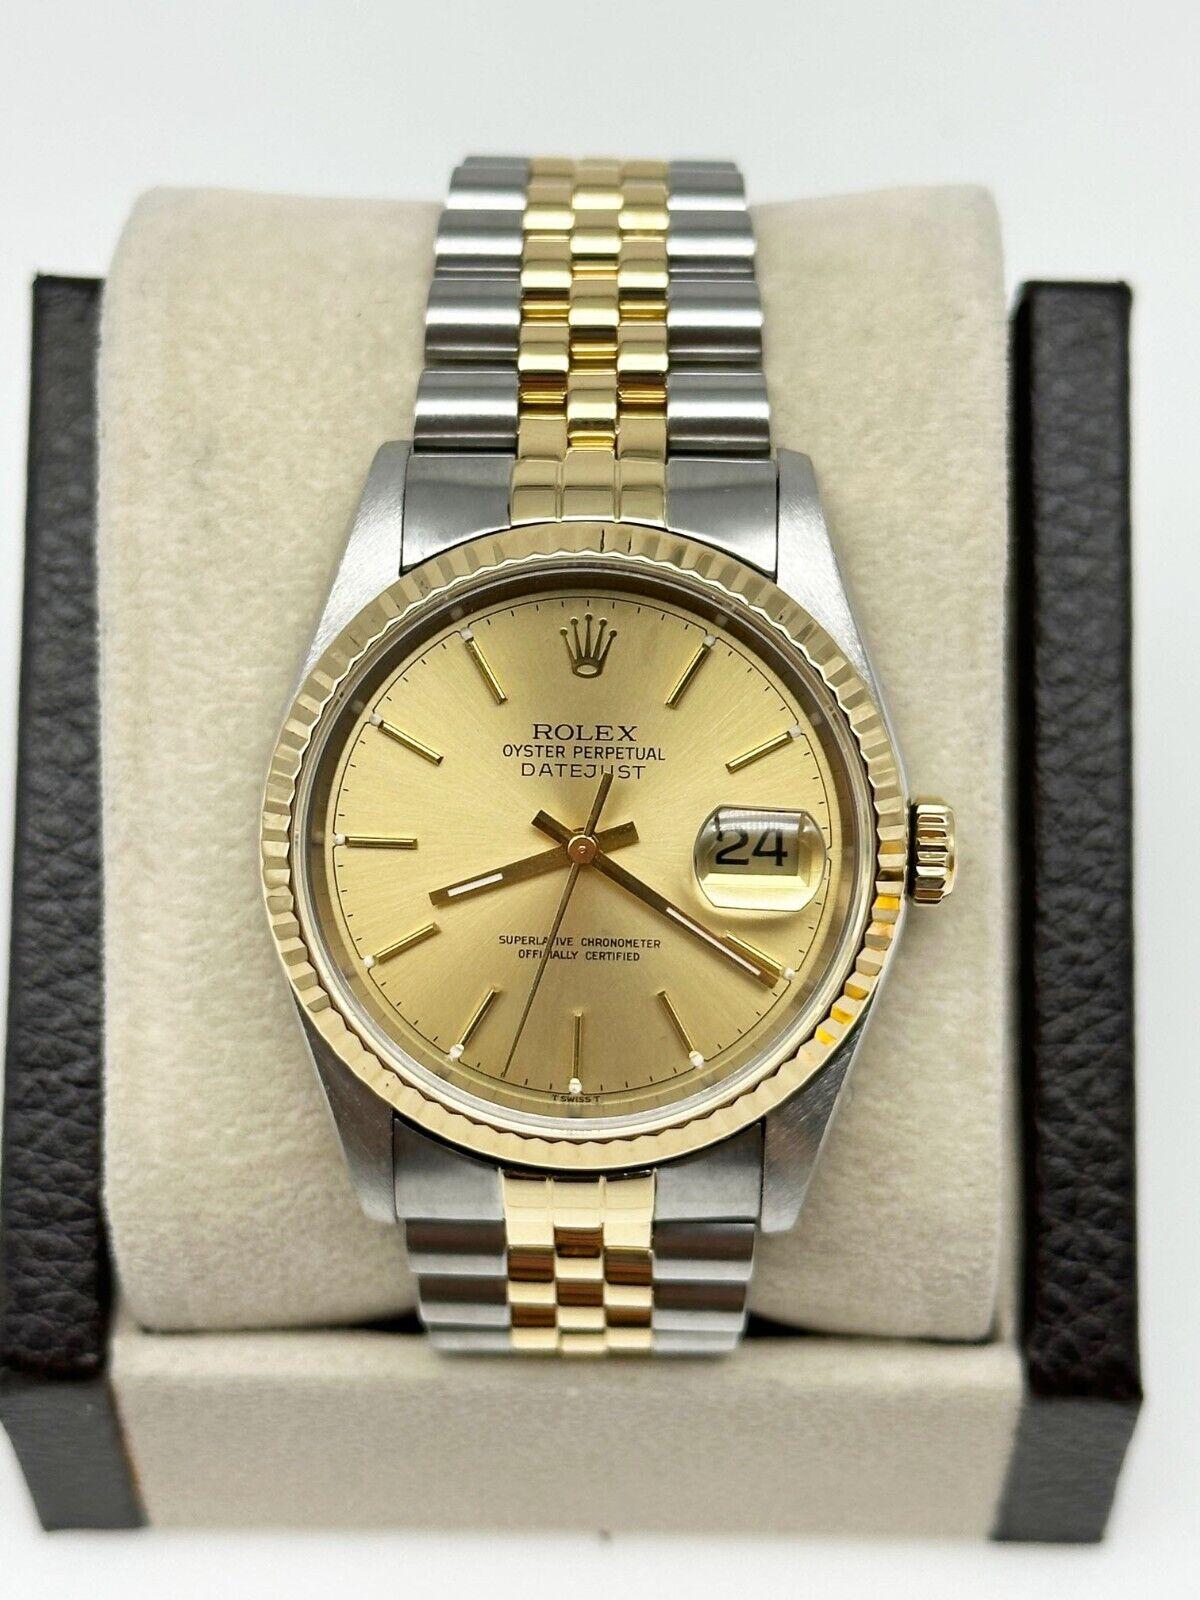 Style Number: 16233

Serial: T524***

Year: 1996

Model: Datejust

Case Material: Stainless Steel

Band: 18K Yellow Gold and Stainless Steel

Bezel: 18K Yellow Gold

Dial: Champagne

Face: Sapphire Crystal

Case Size: 36mm
 
Includes: 

-Elegant